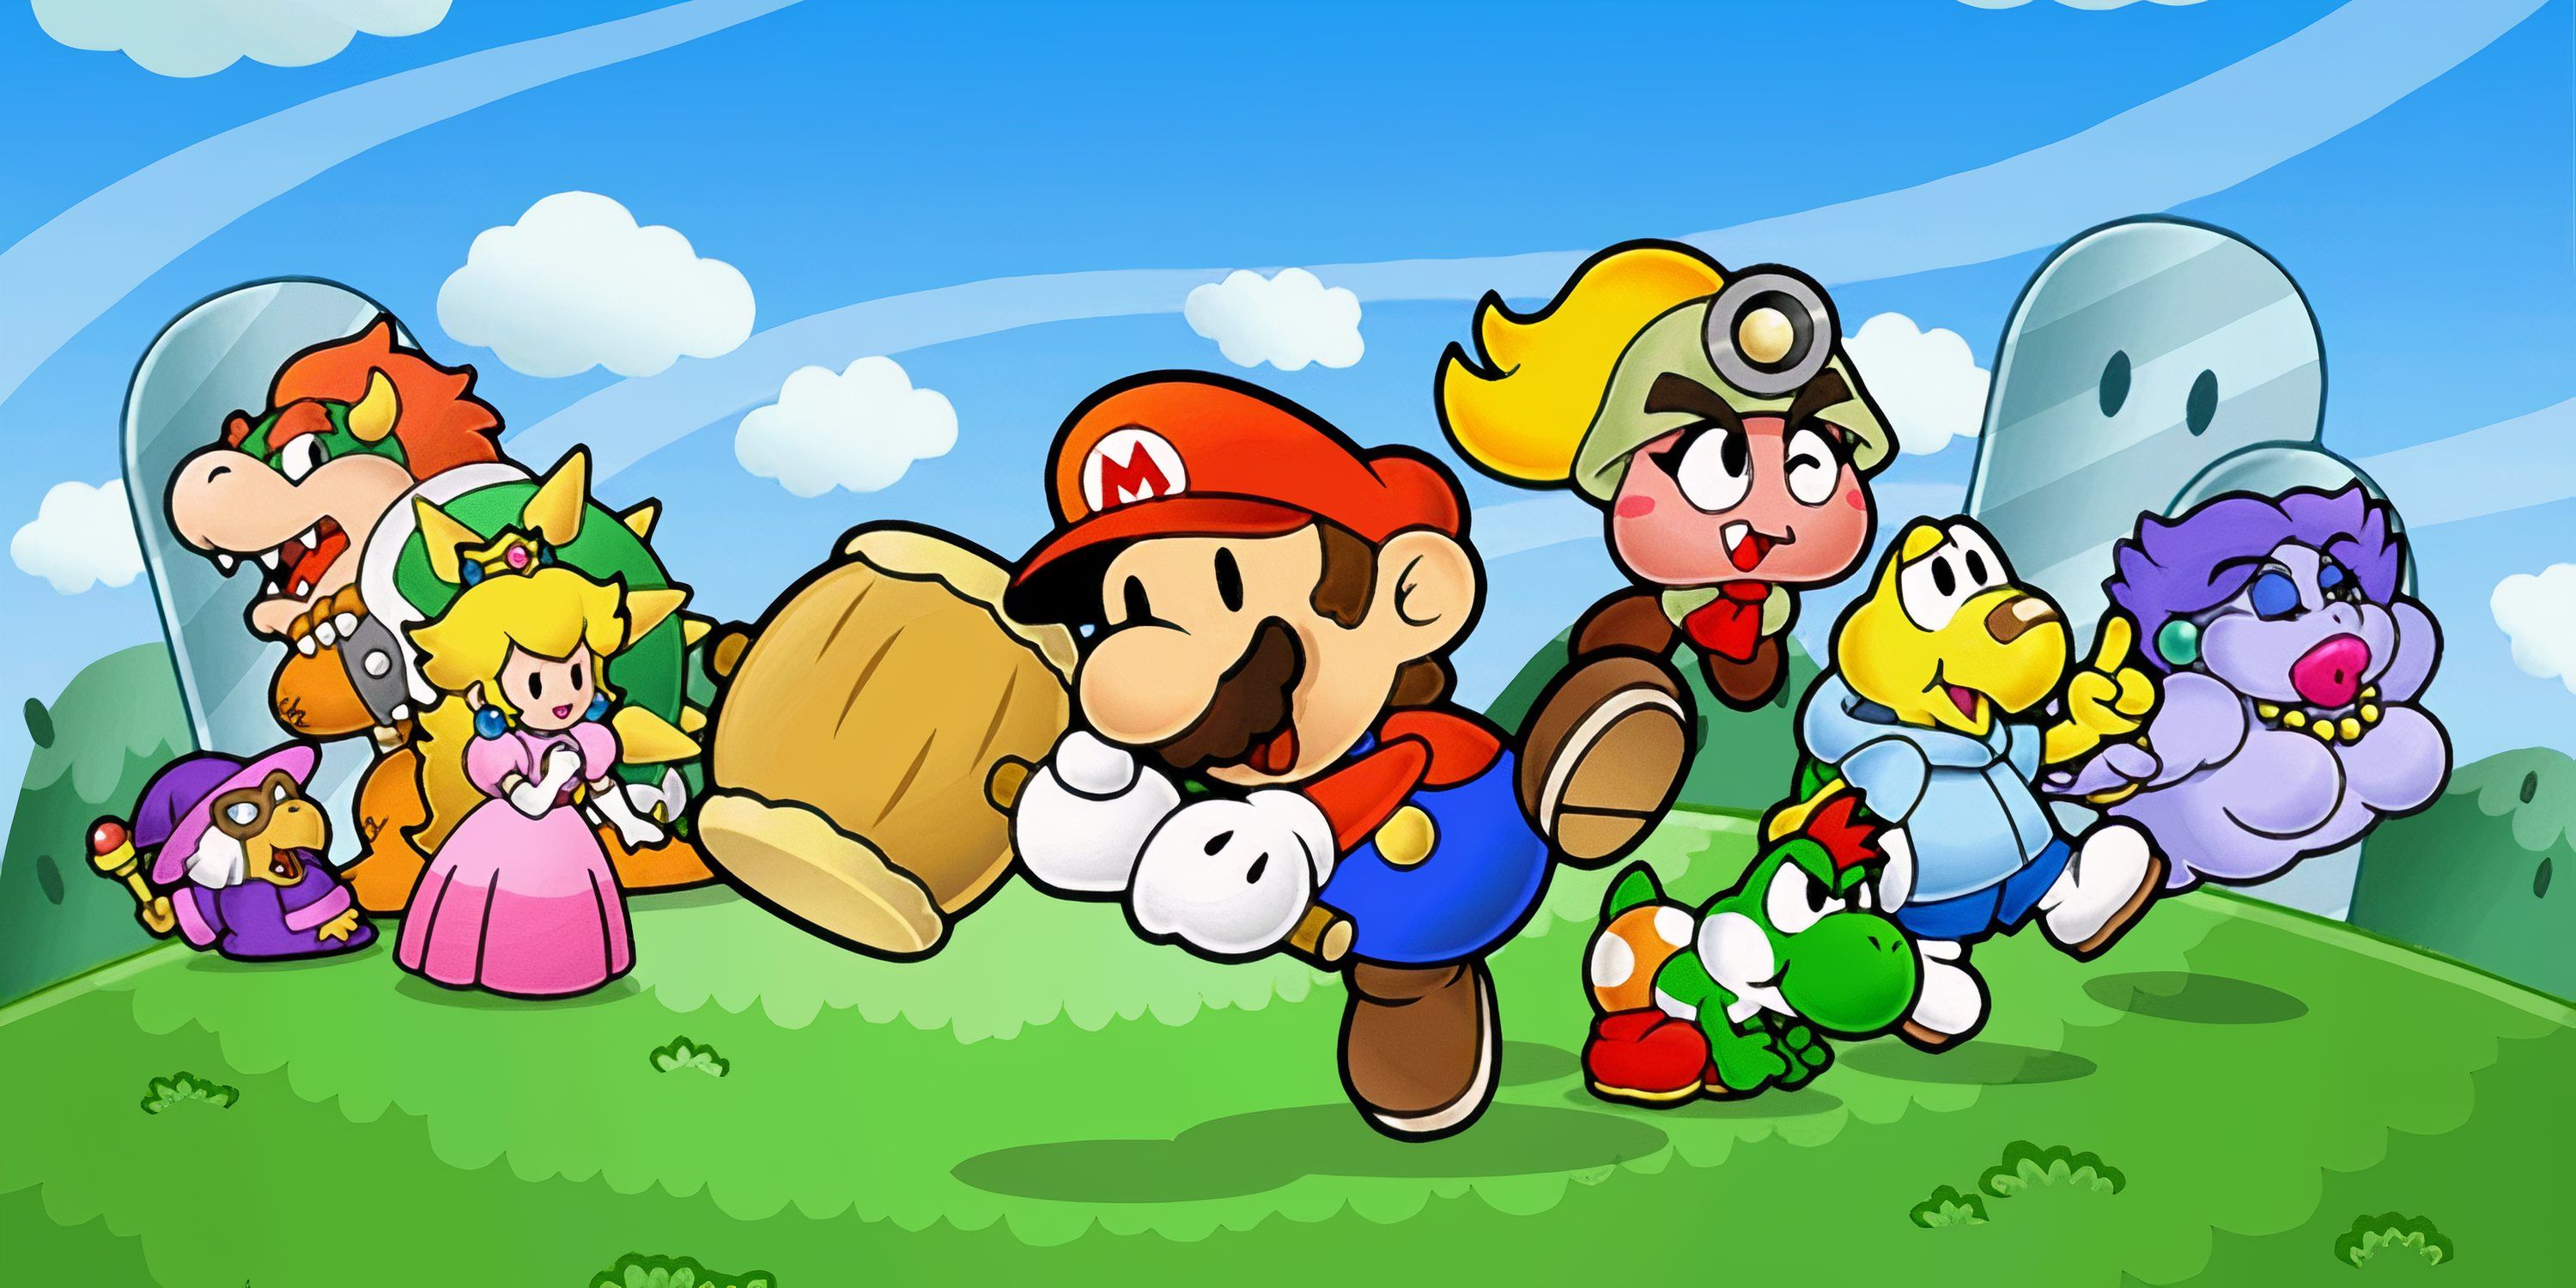 Paper Mario swings a hammer with Princess Peach, Bowser, Goombella, Koops, Flurrie, and Yoshi Kid next to him